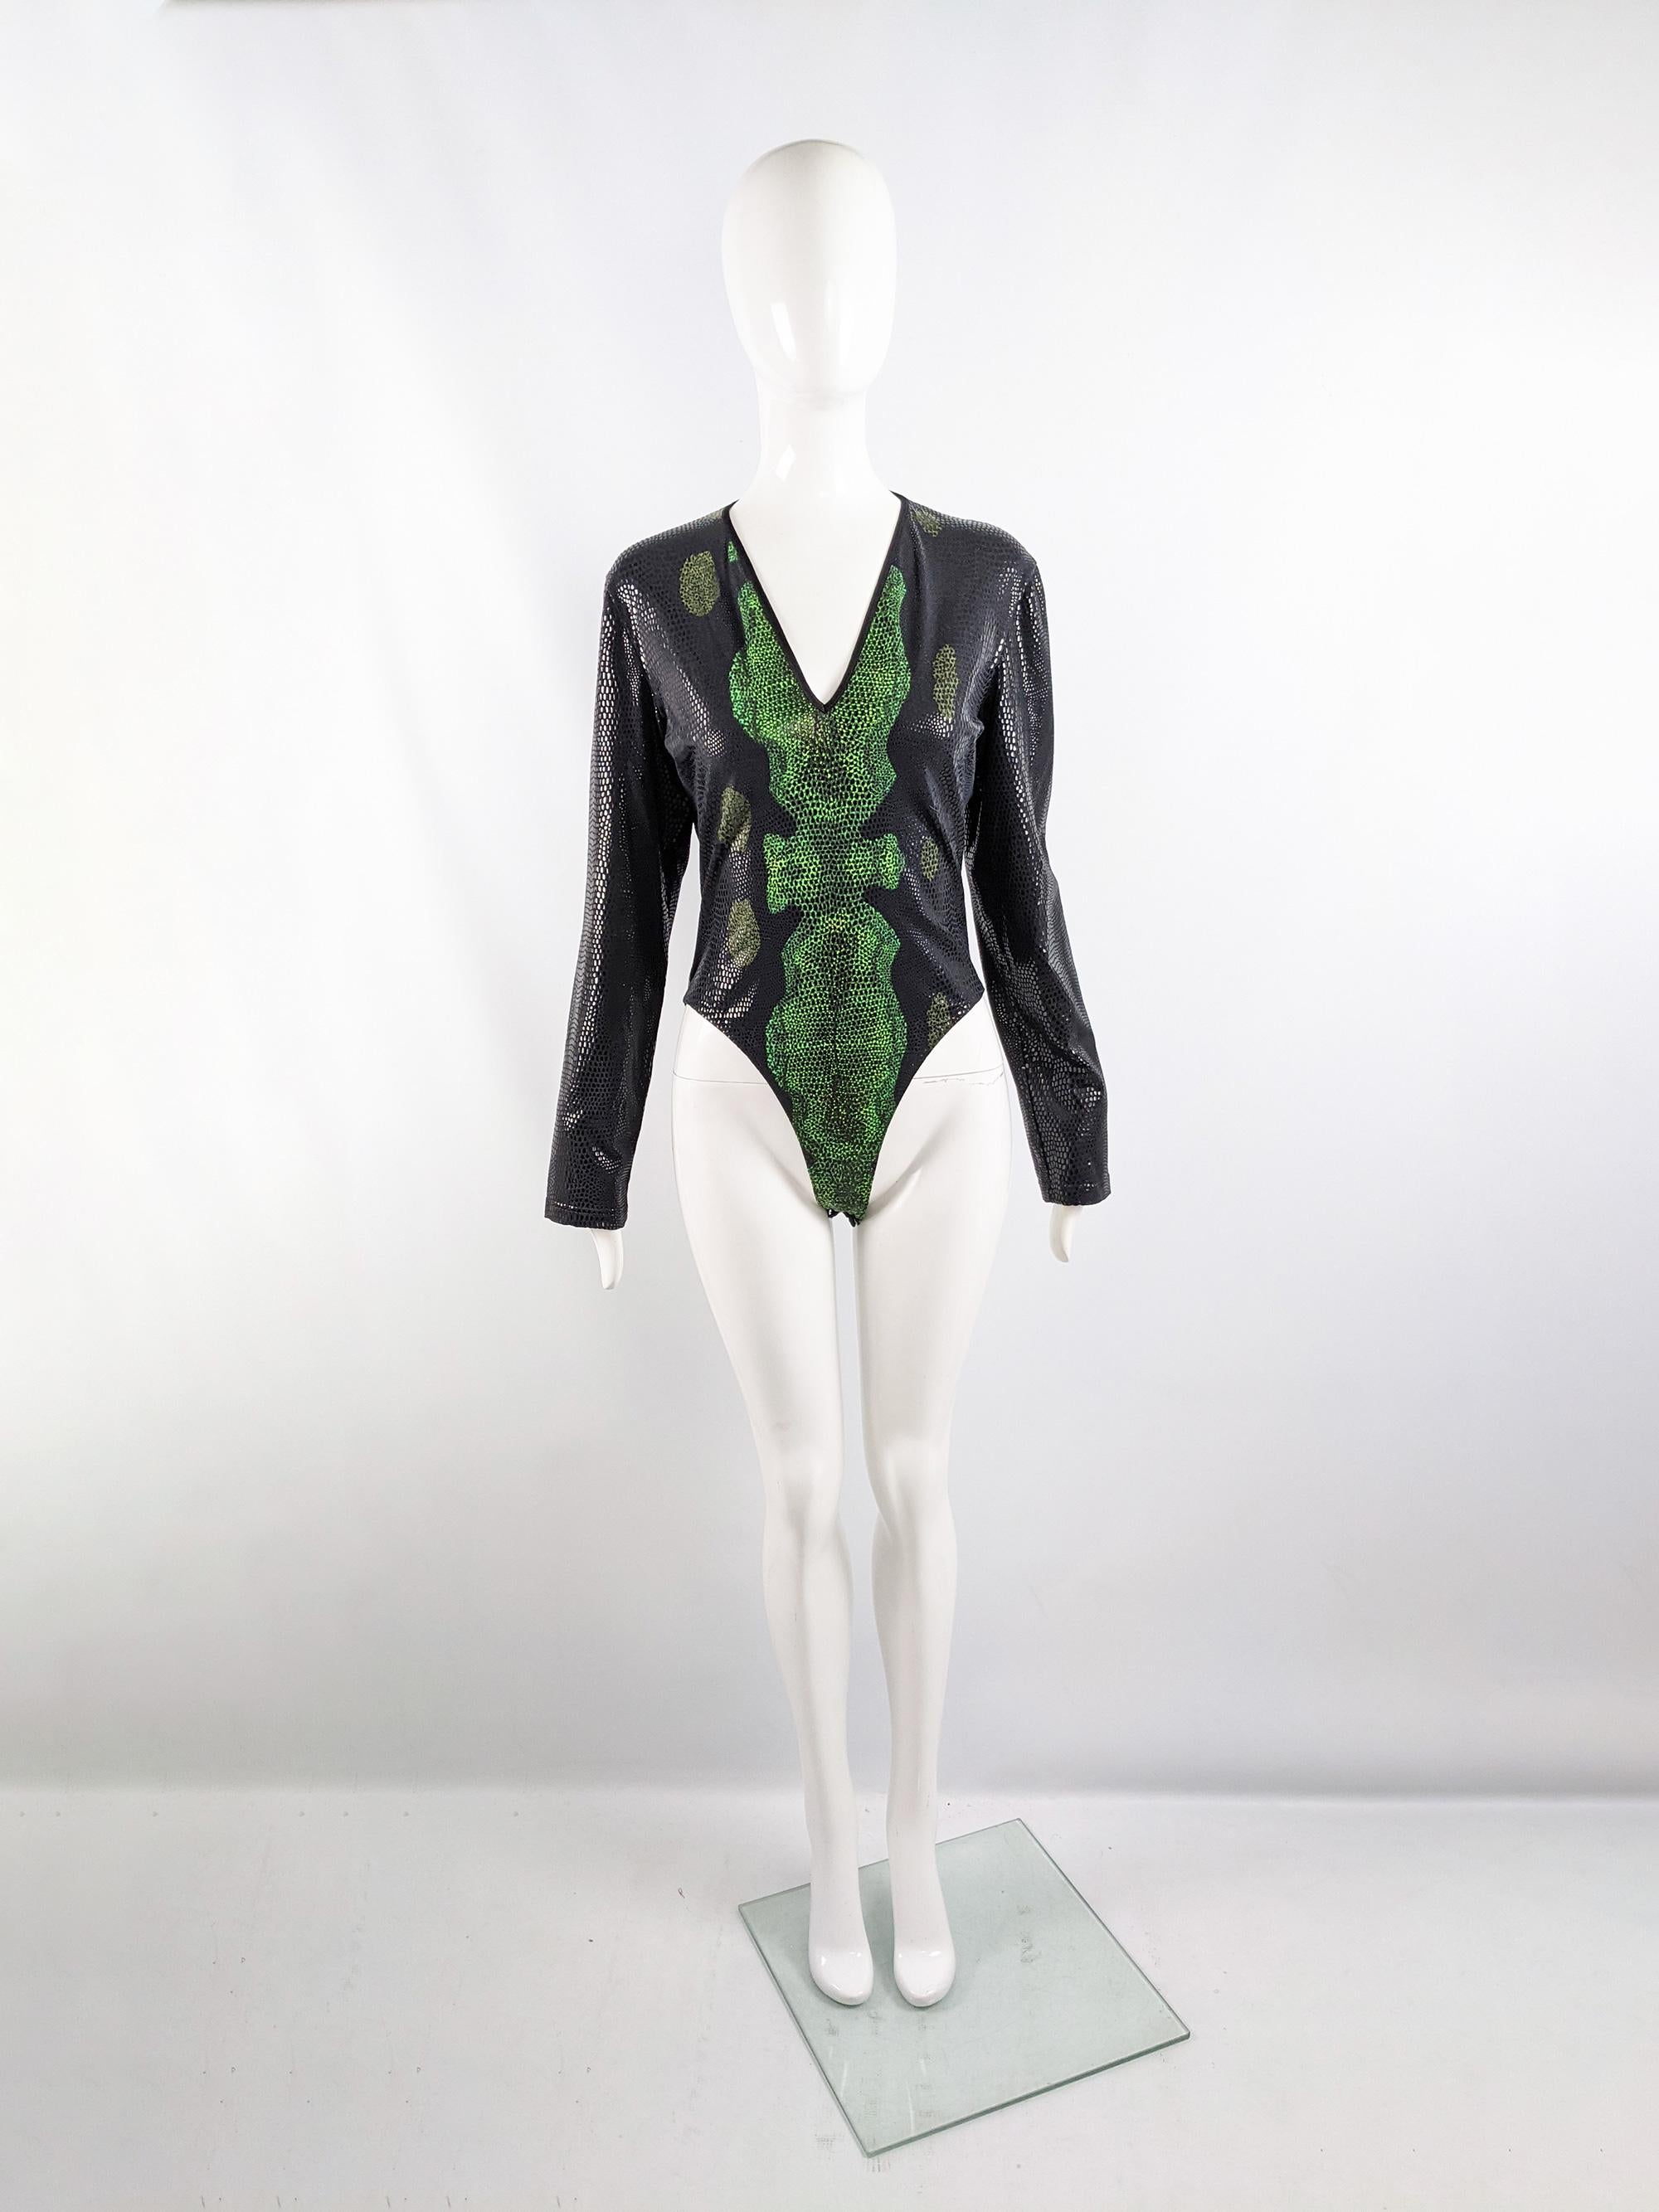 An amazing vintage Thierry Mugler bodysuit from c. the late 90s. In a black and green snakeskin print fabric with rubber details creating a scale effect throughout. It has long sleeves and a deep v neckline, perfect for a party. 

Size: Marked